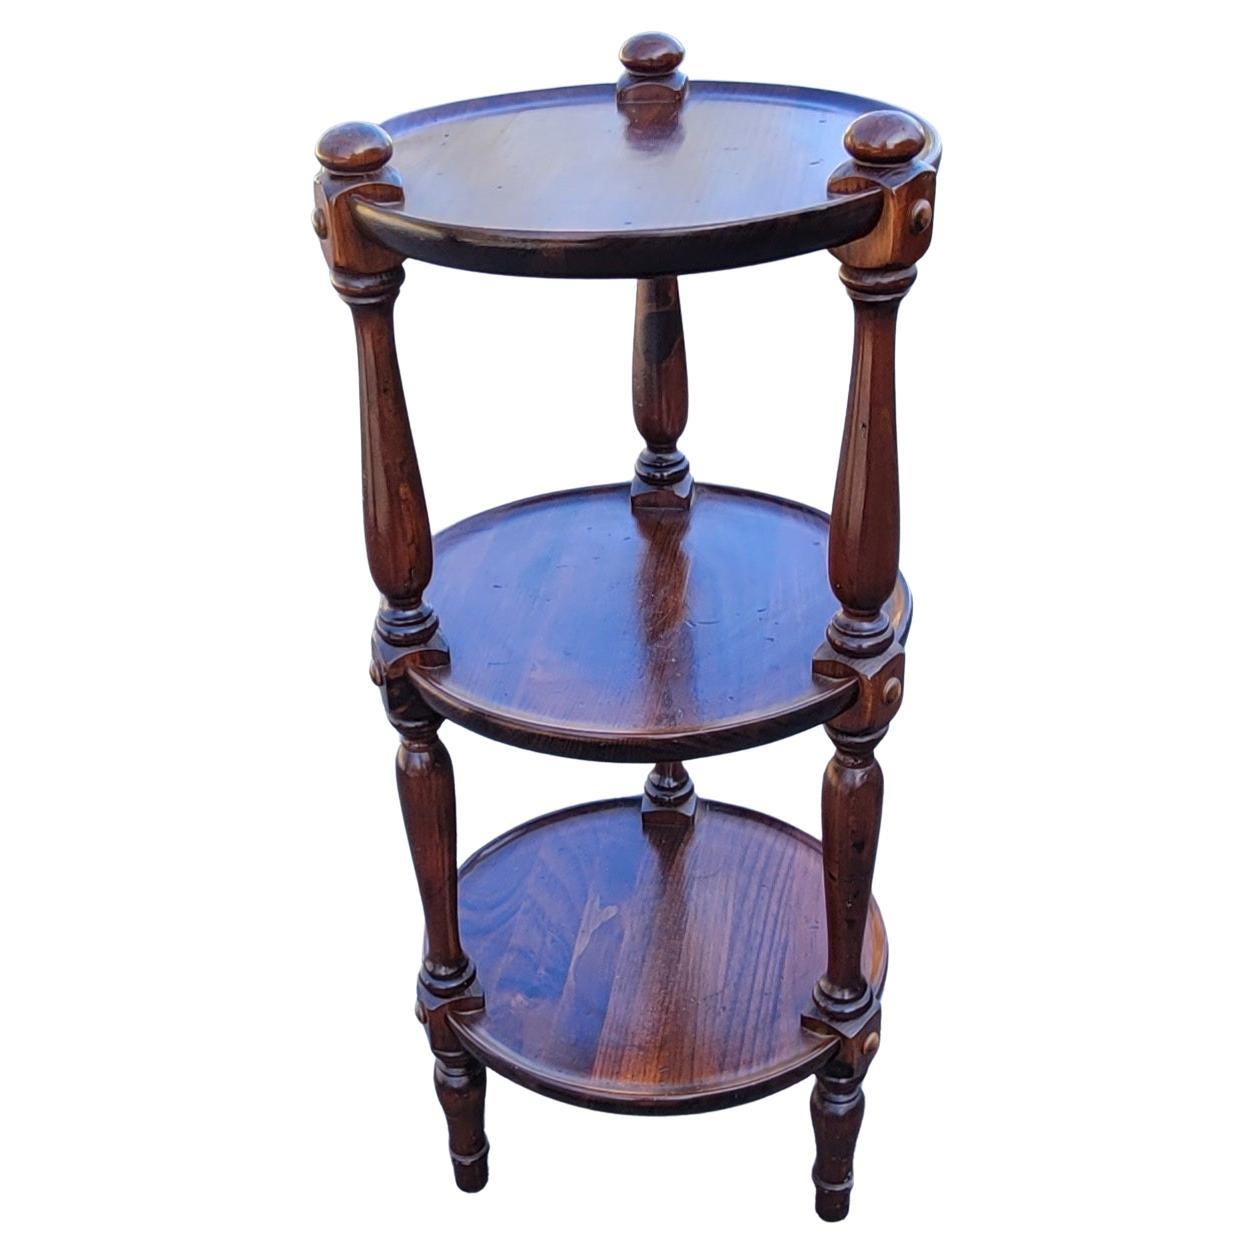 Ethan Allen Old Tavern Collection Pine 3 Tier Plant Stand Table, circa 1970s